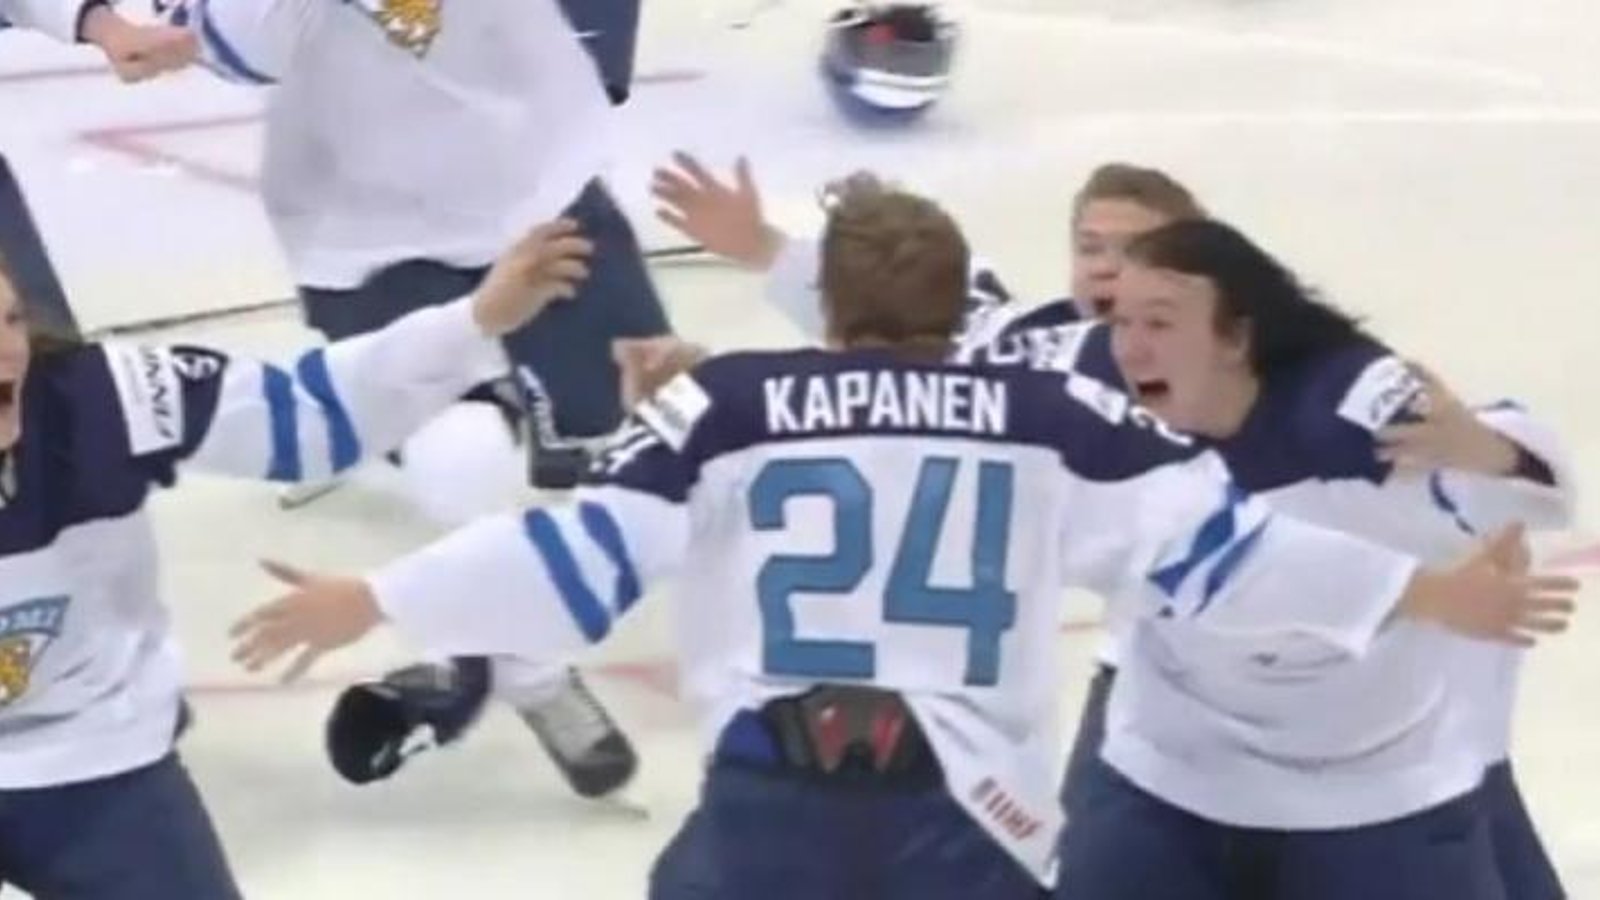 World Junior Champion crowned with this overtime goal!